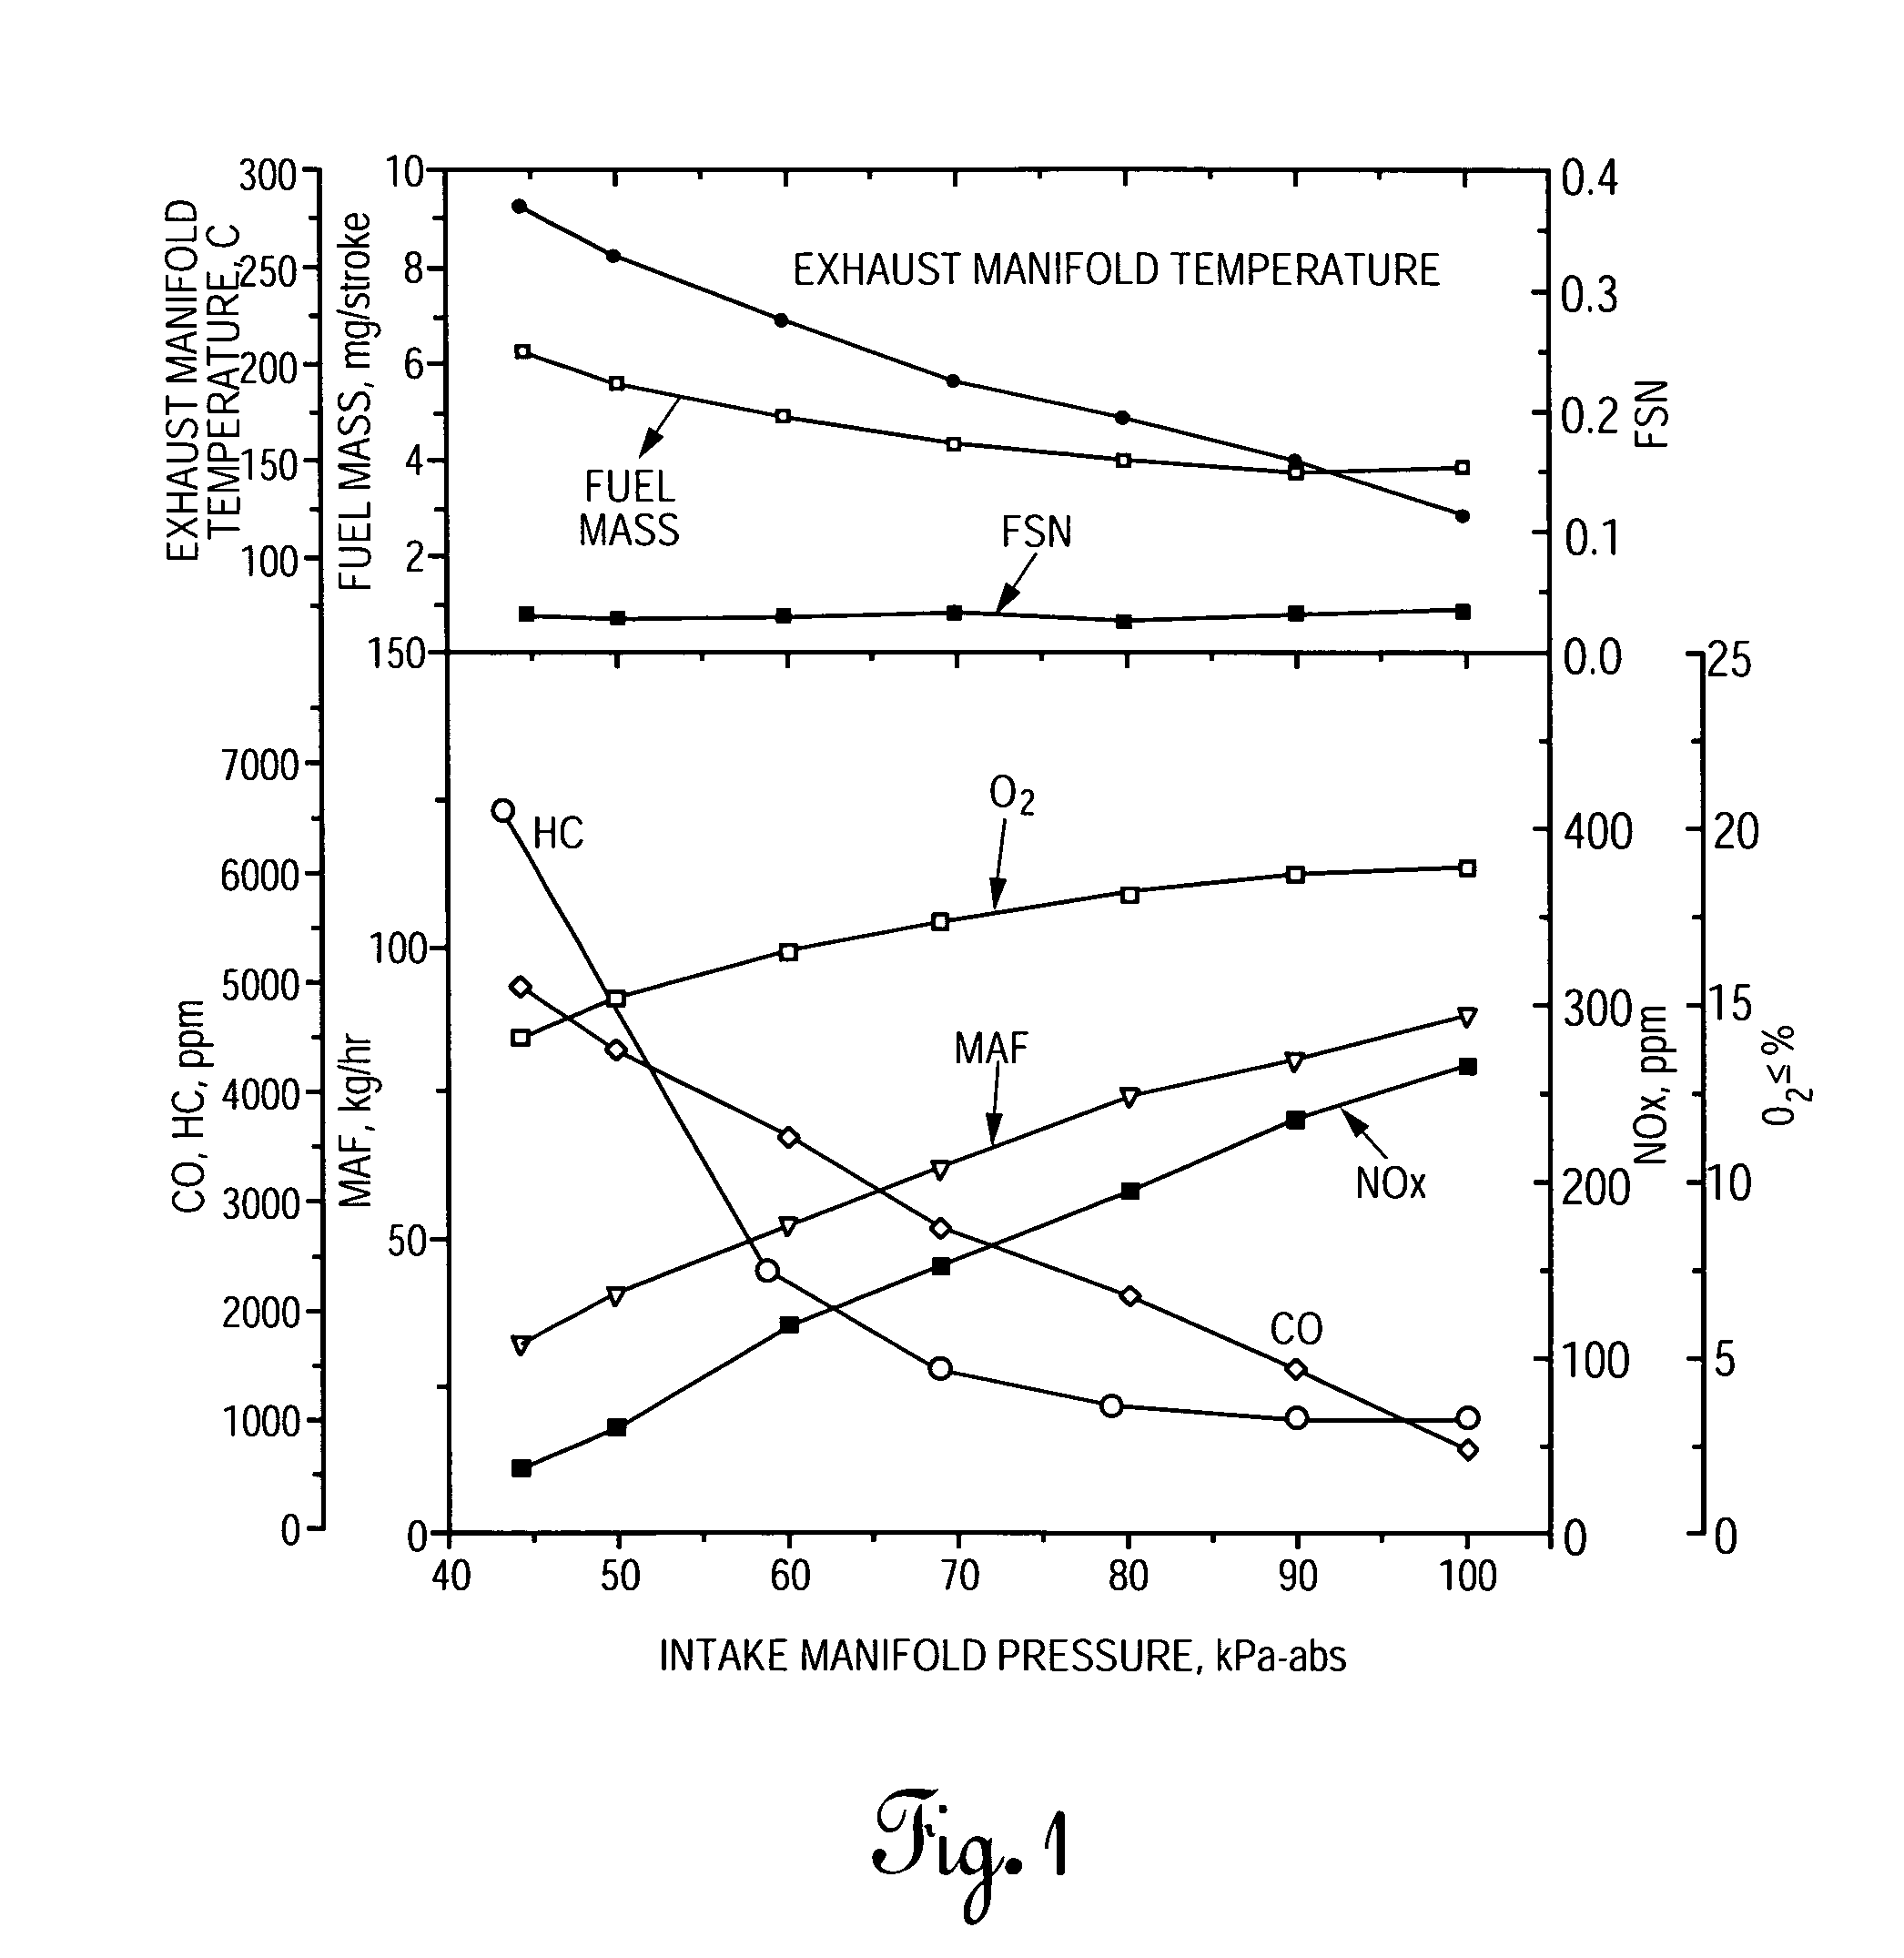 Method for operating a diesel engine in a homogeneous charge compression ignition combustion mode under idle and light-load operating conditions